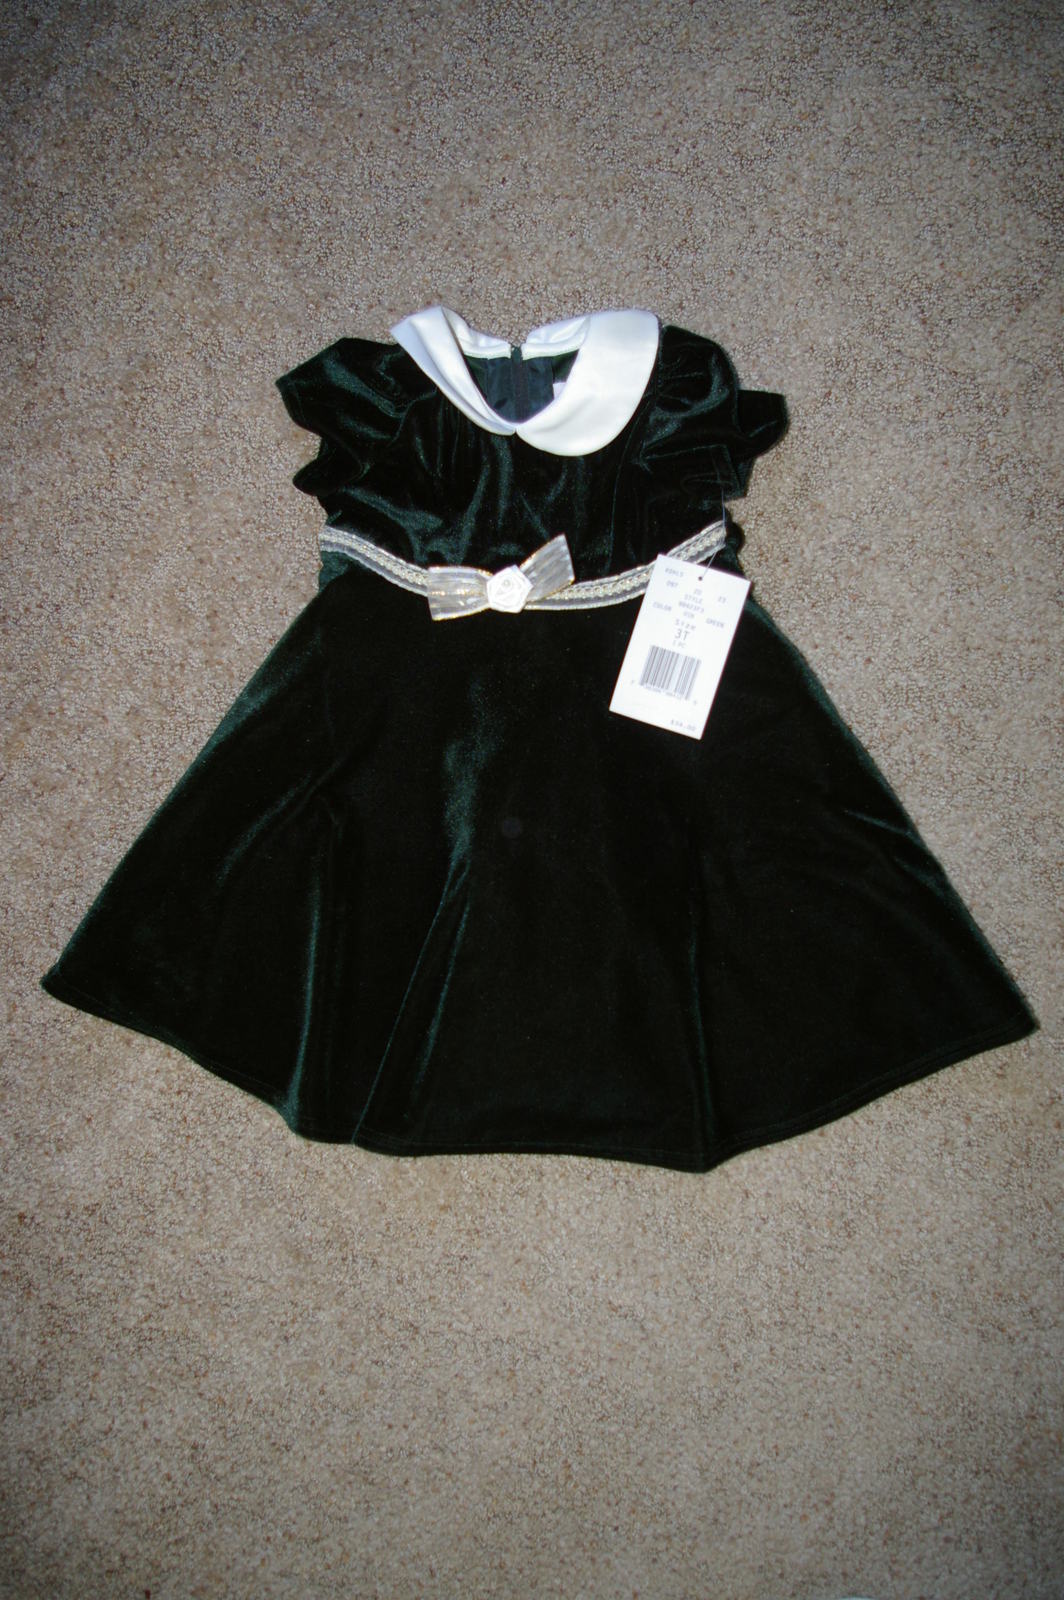 Green Sophie Rose Velour Classic Holiday Dress Size 3T NWT - $20.00